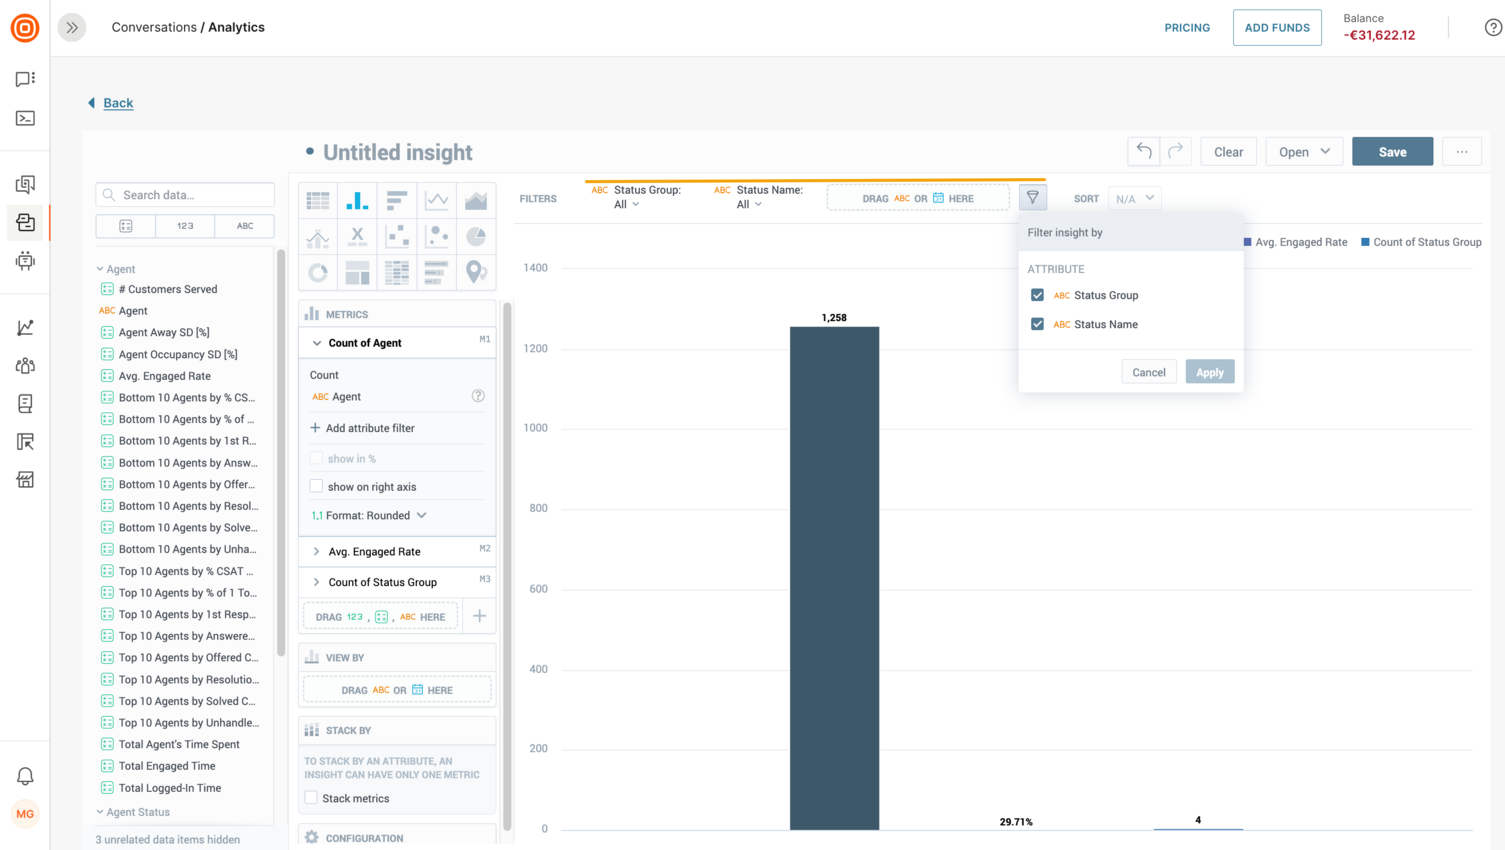 Conversations - Filter insight analytics by